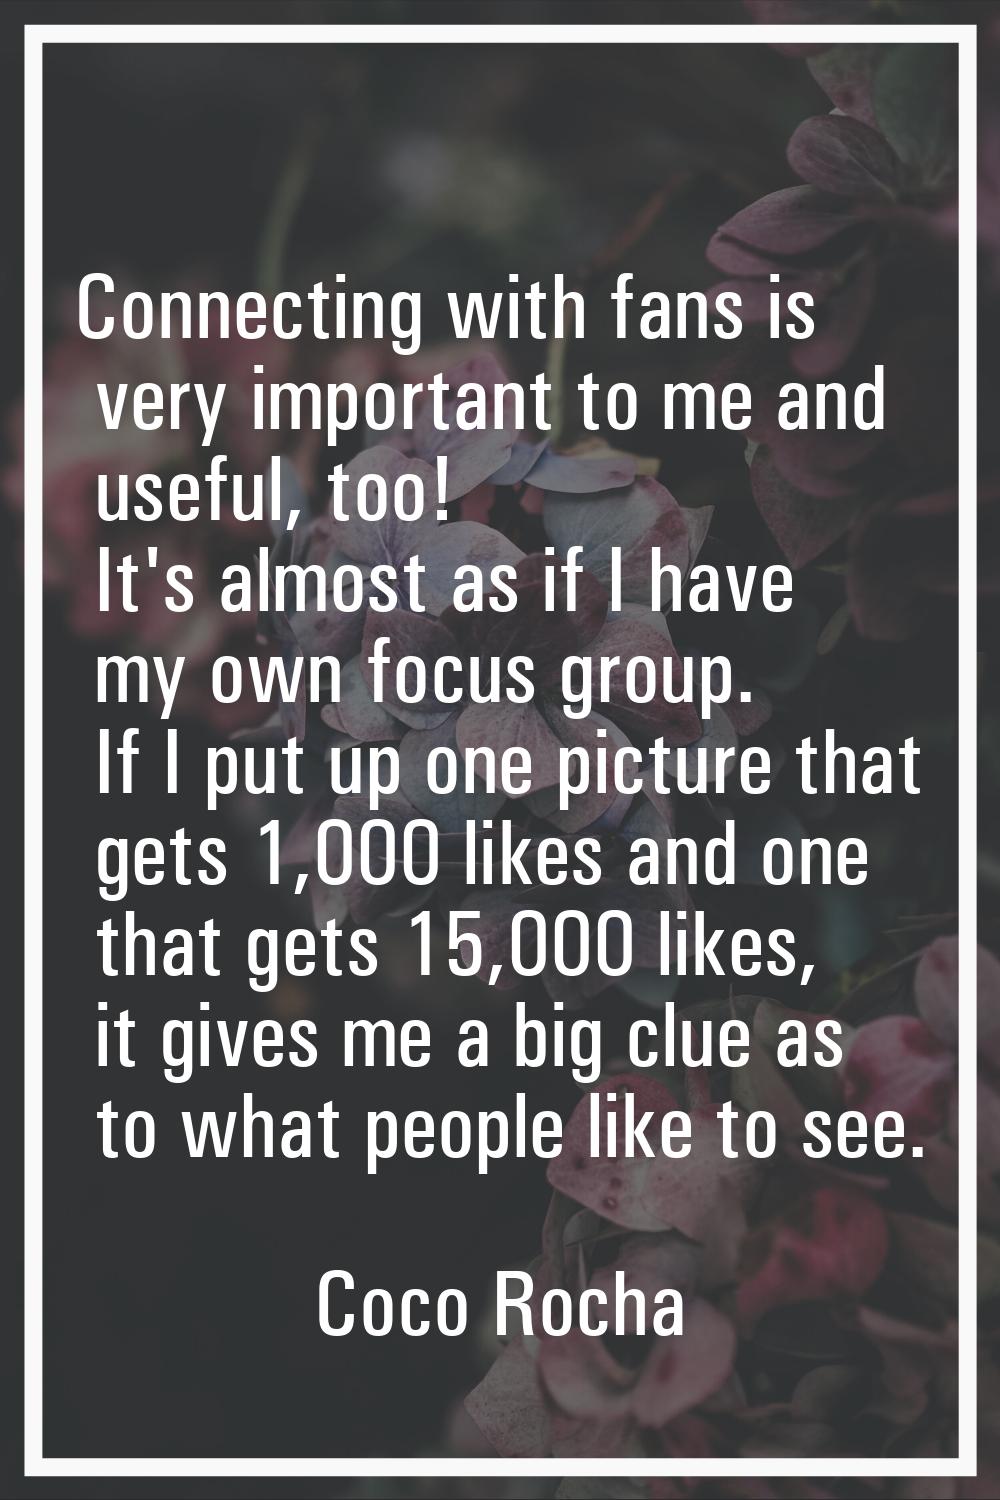 Connecting with fans is very important to me and useful, too! It's almost as if I have my own focus